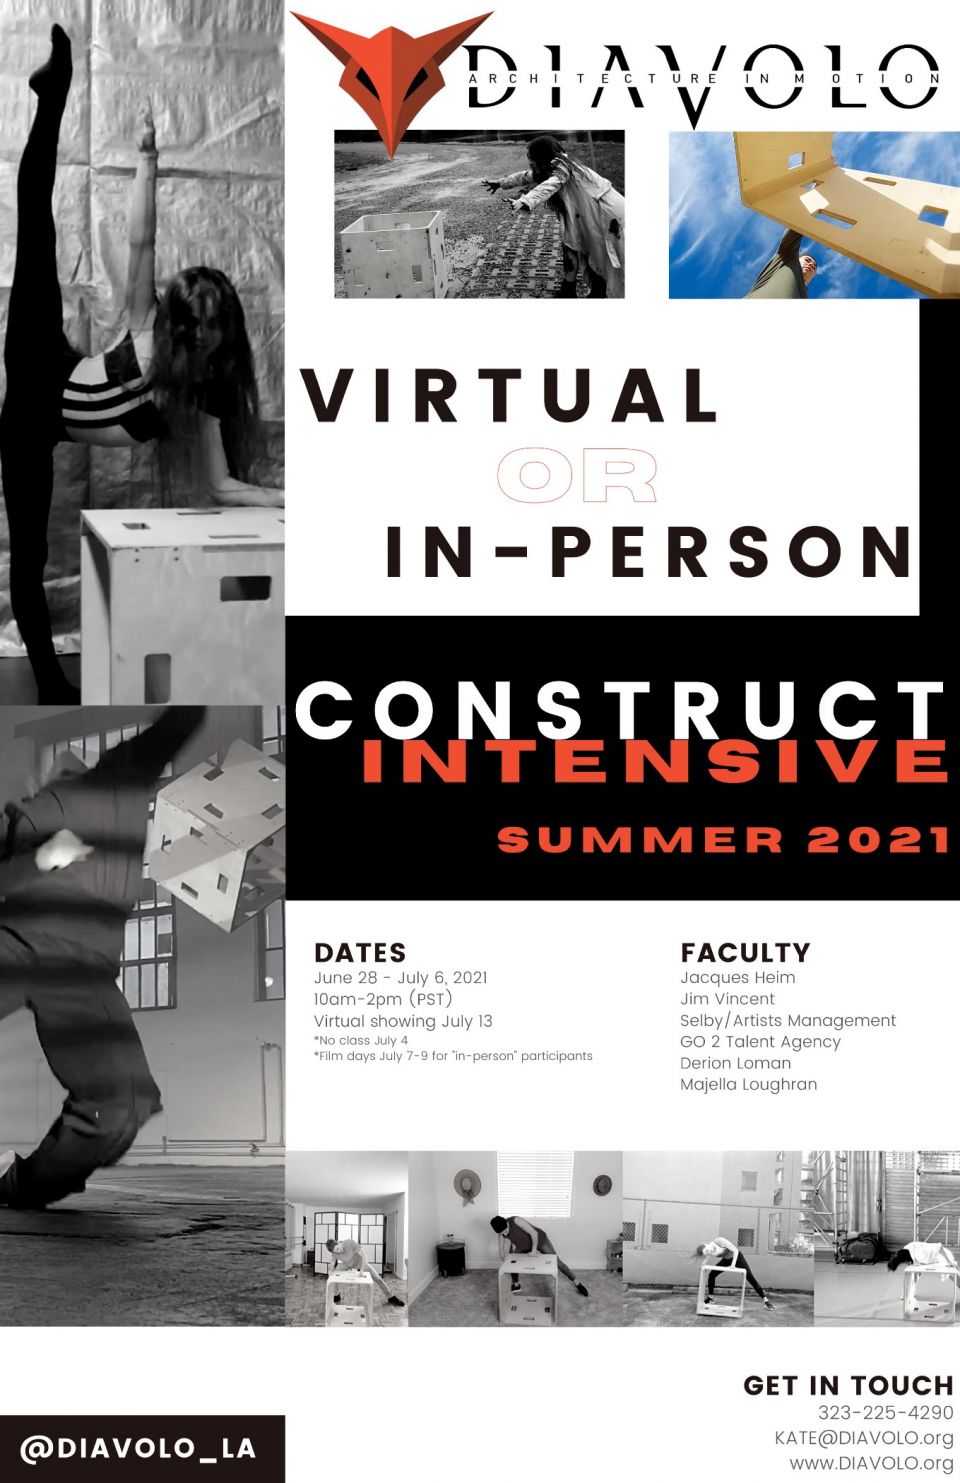 DIAVOLO'SCONSTRUCT SUMMER INTENSIVEVirtual and In=Person spots available! Virtual participants will receive a kit to build your very own DIAVOLO cubicle! In-Person participants will conclude the intensive with a professional one on one session with two time Emmy-winning cinematographer, Aaron Mendez! June 28-July 6 10am-2pm PSTcheck out www.diavolo.org for more info!